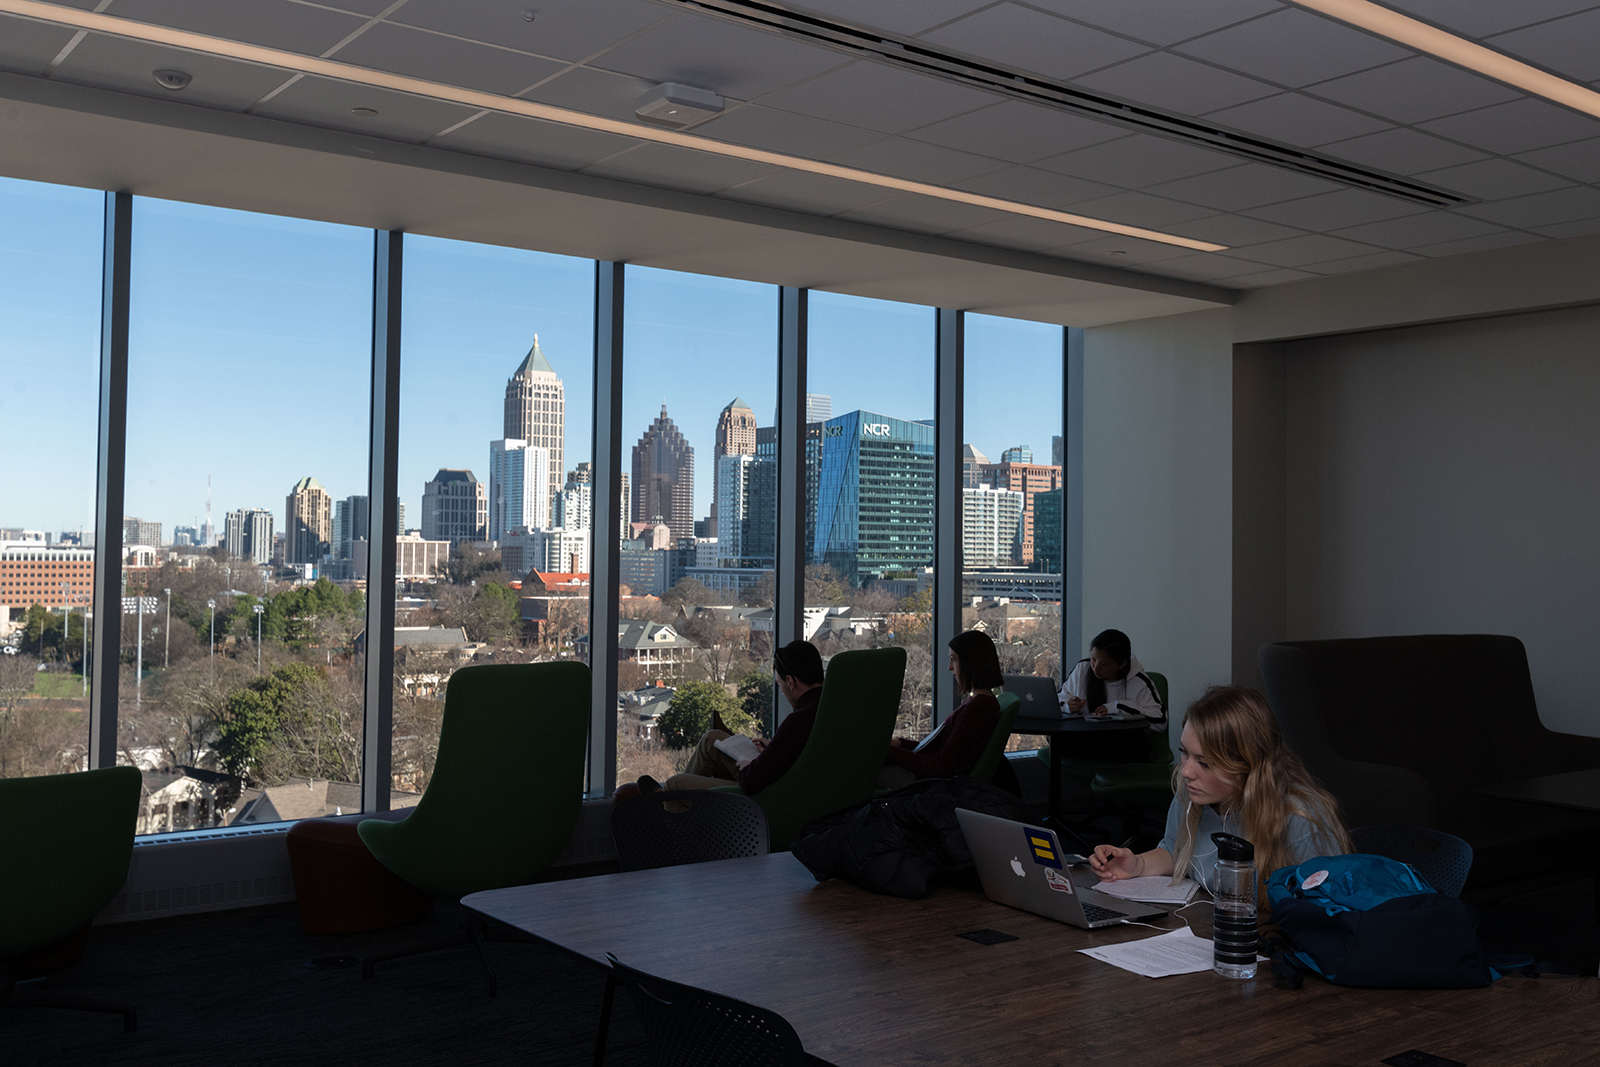 Several floors now offer skyline views and workspace